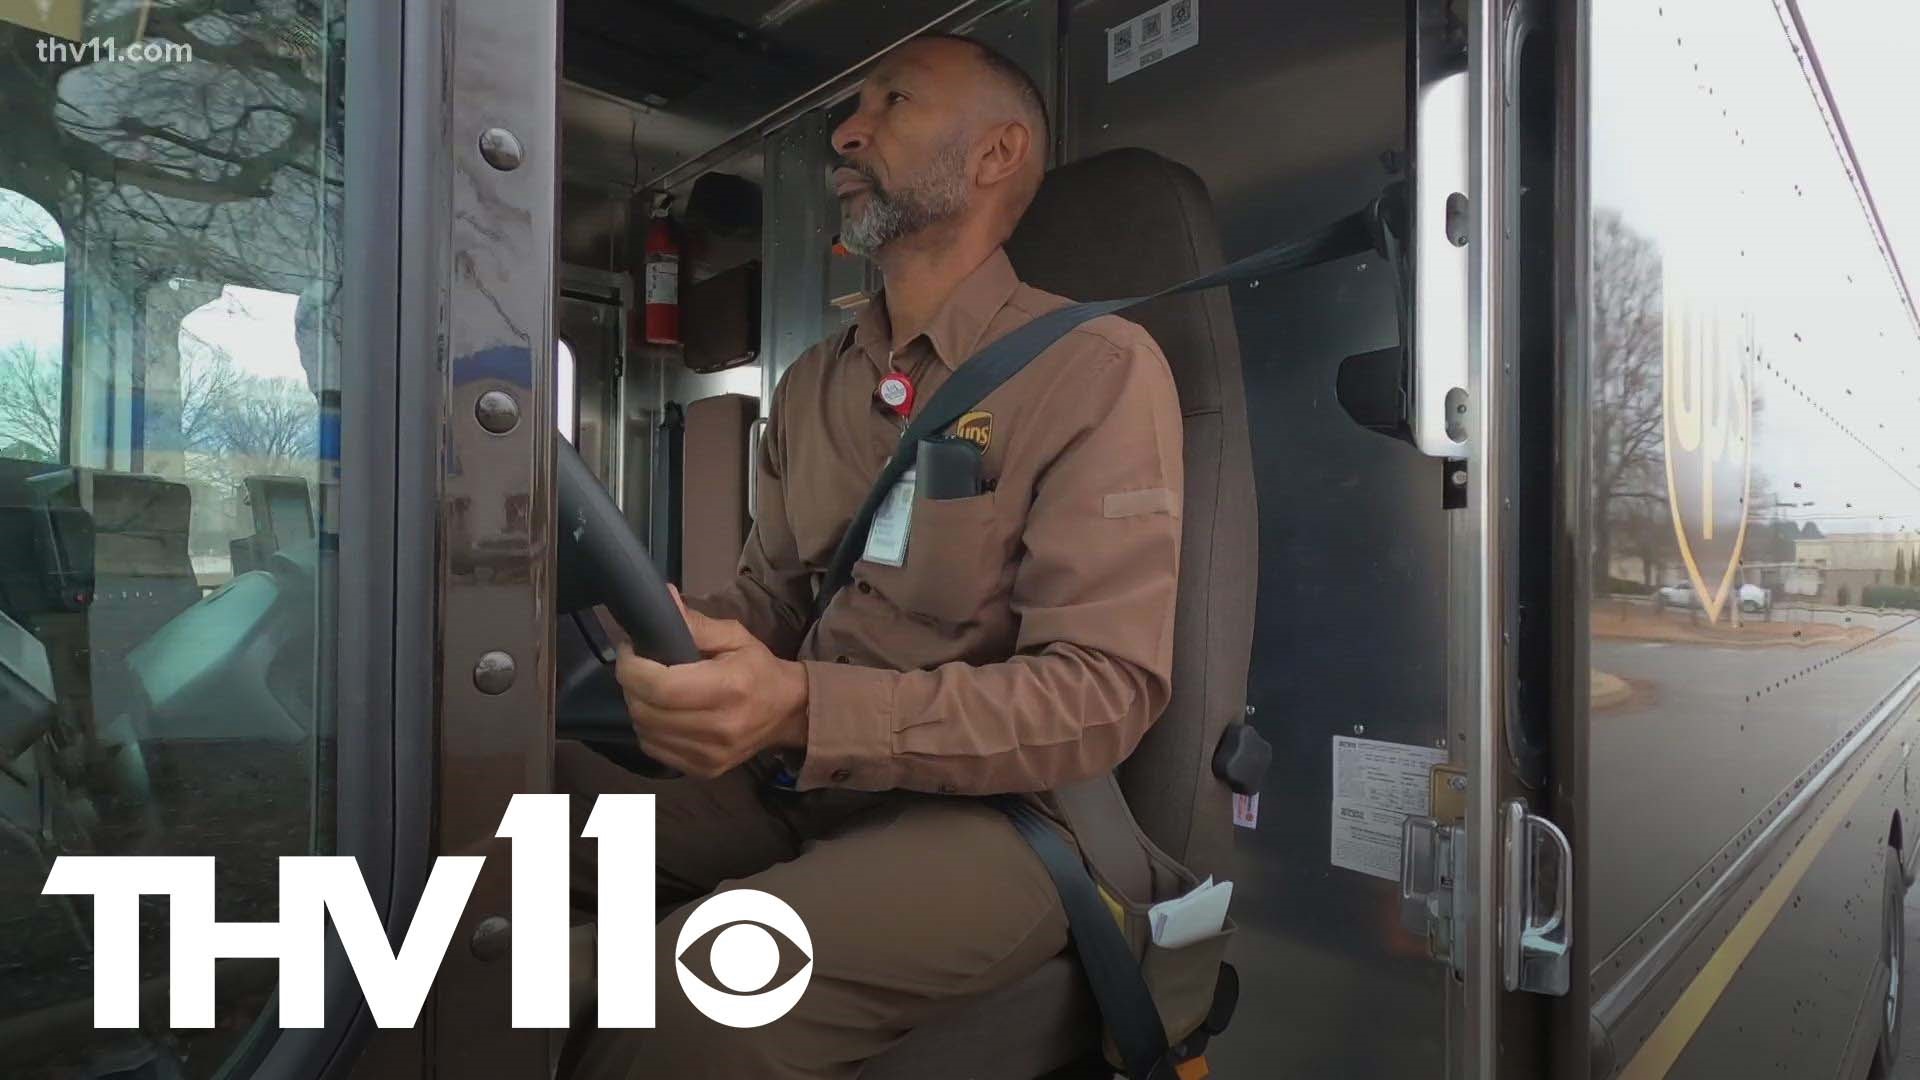 Frederick Stephens has traveled miles and miles in his UPS truck.  While out delivering packages, he helped get an elderly woman back home safely.